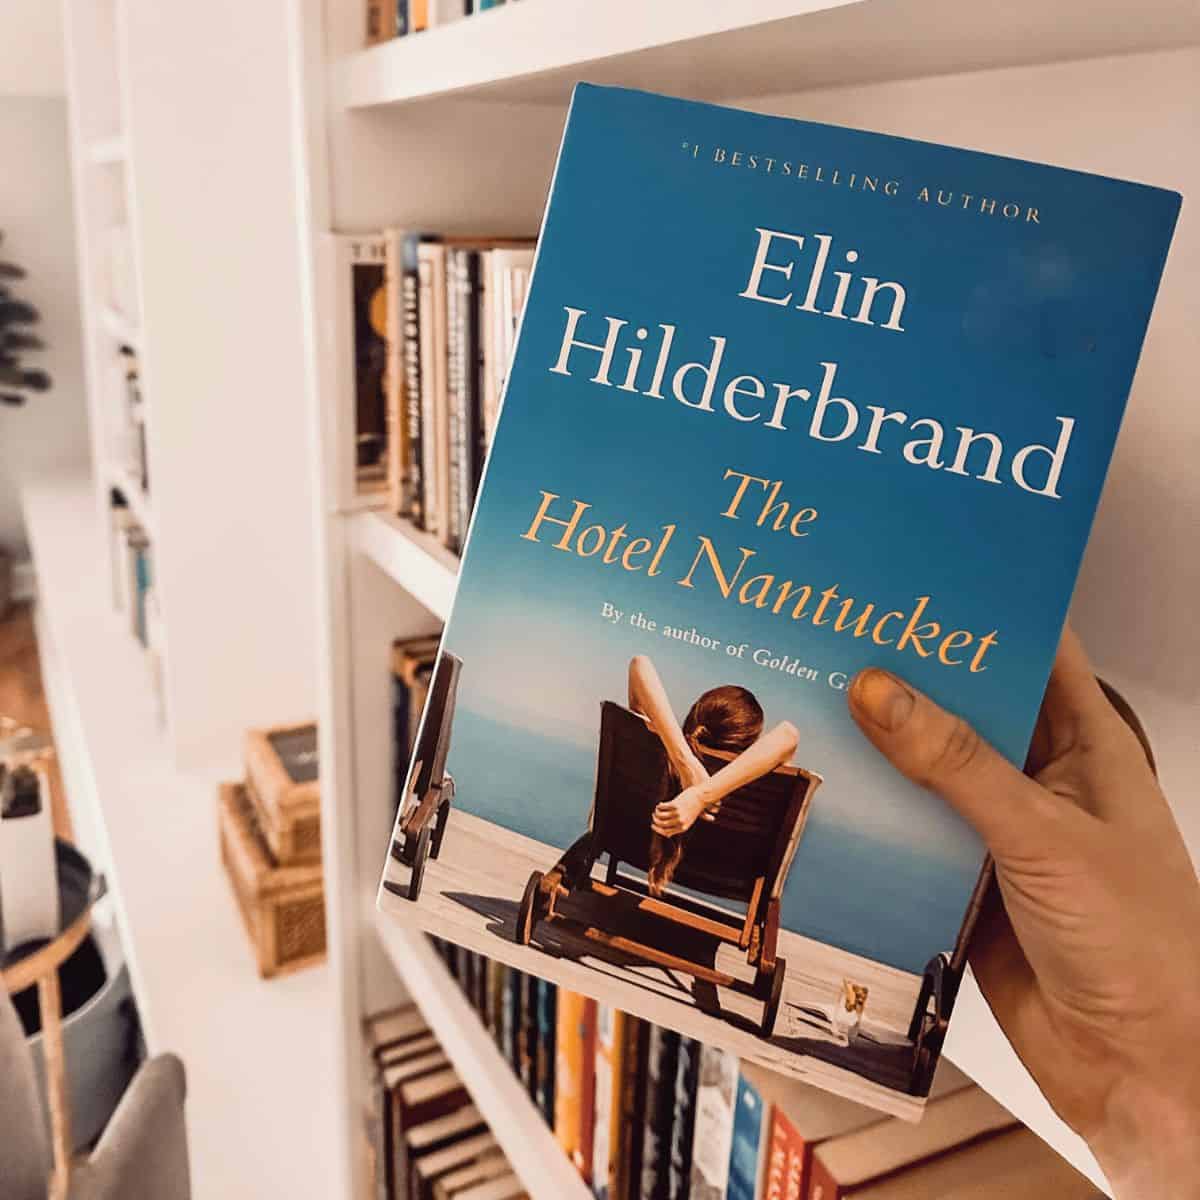 the hotel nantucket by elin hilderbrand held up in front of a bookcase.